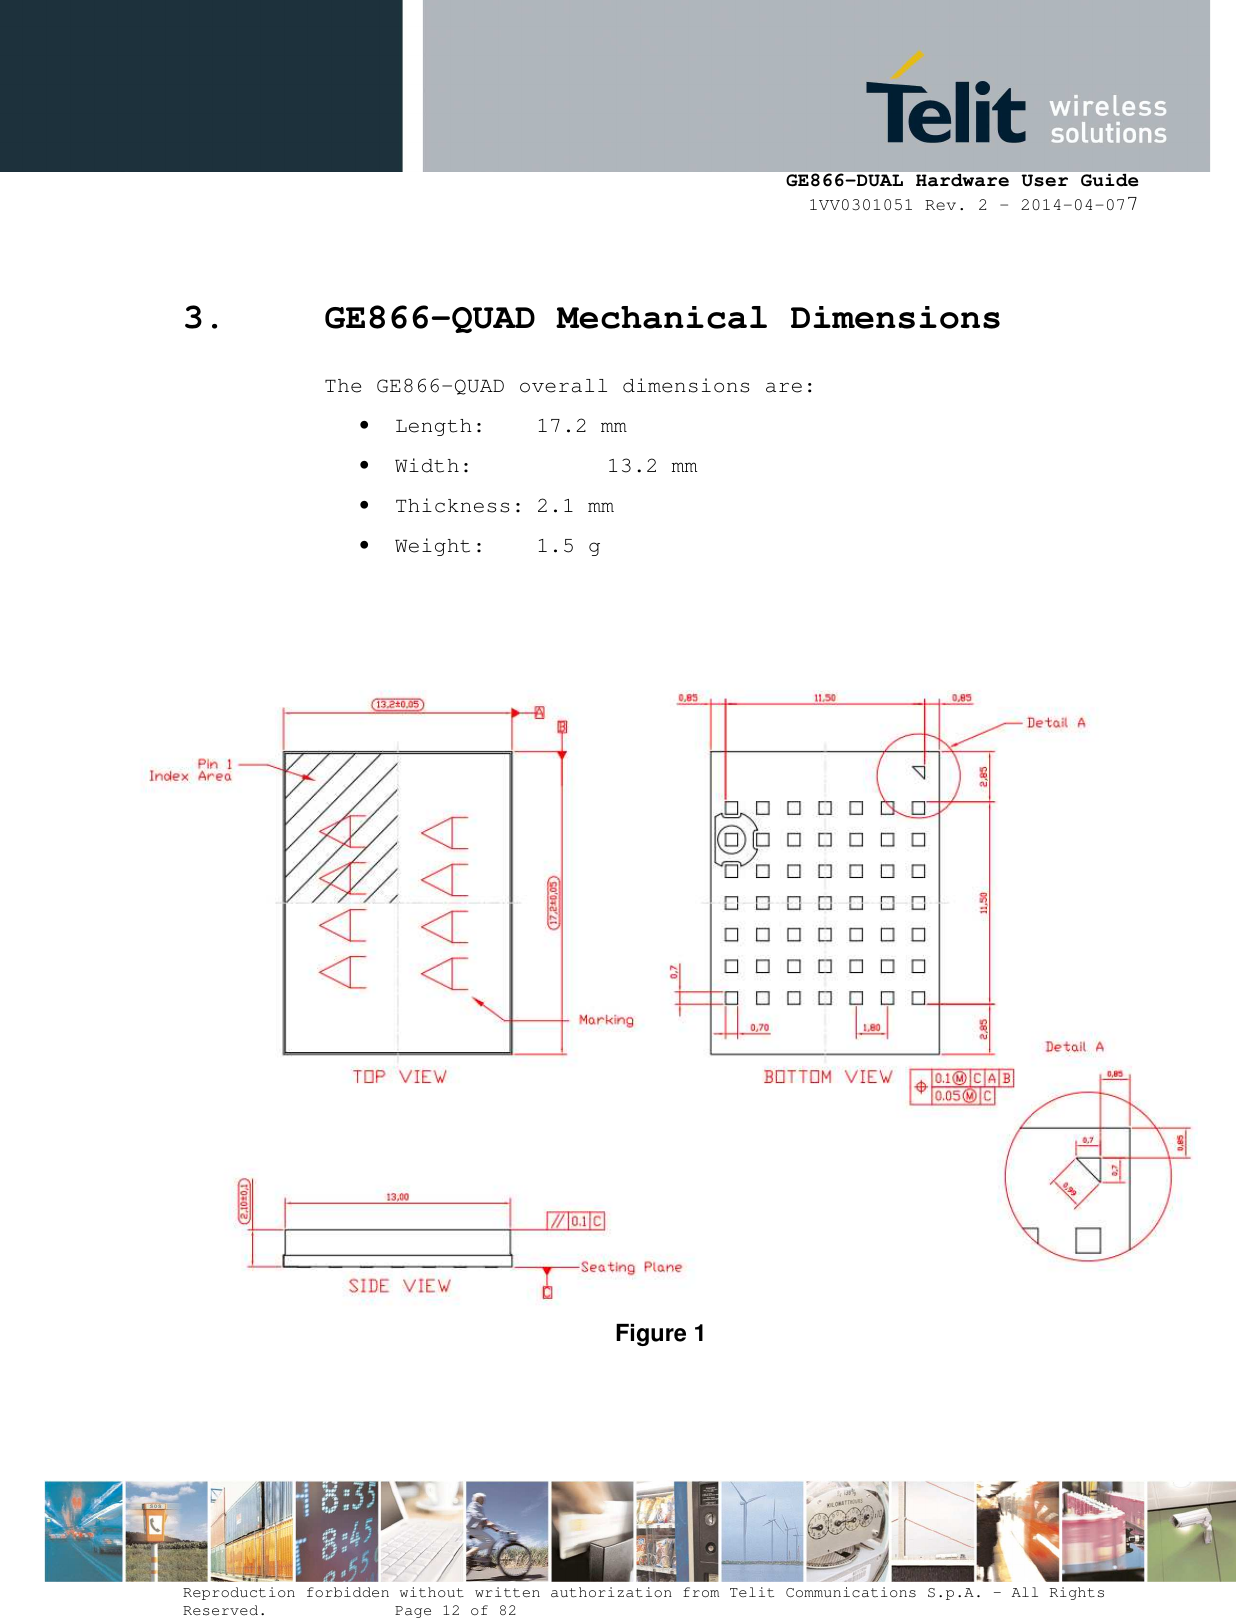      GE866-DUAL Hardware User Guide 1VV0301051 Rev. 2 – 2014-04-077  Reproduction forbidden without written authorization from Telit Communications S.p.A. - All Rights Reserved.    Page 12 of 82 Mod. 0805 2011-07 Rev.2 3. GE866-QUAD Mechanical Dimensions The GE866-QUAD overall dimensions are: • Length:  17.2 mm • Width:    13.2 mm • Thickness: 2.1 mm • Weight:  1.5 g    Figure 1 